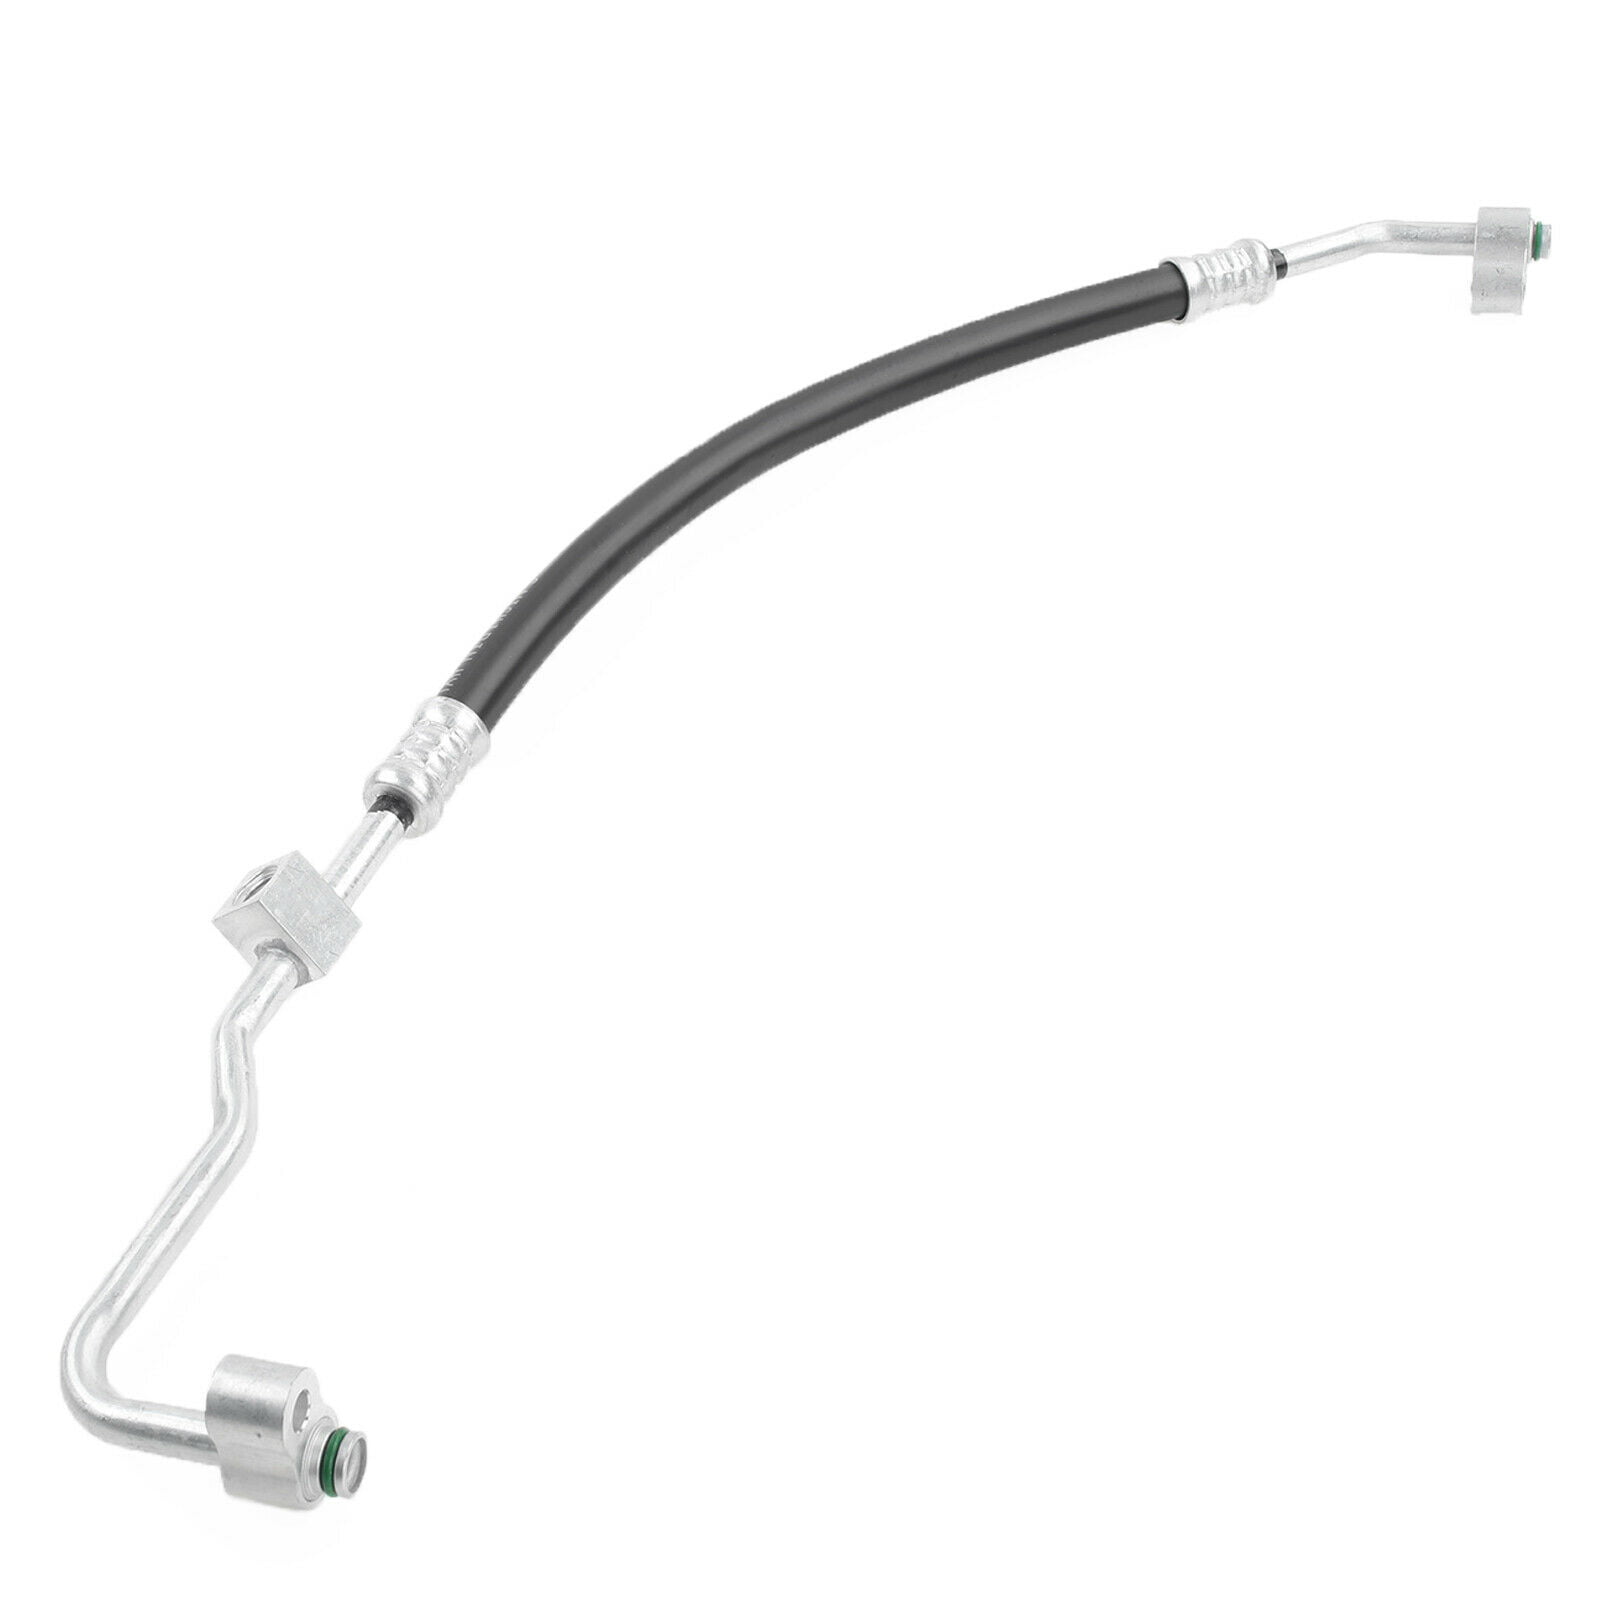 A-Premium A/C Discharge Hose Compatible with Mercedes-Benz W163 Series  ML320 2002-2003 ML350 2003-2005 ML500 2002-2005 Compressor to Condenser  その他DIY、業務、産業用品